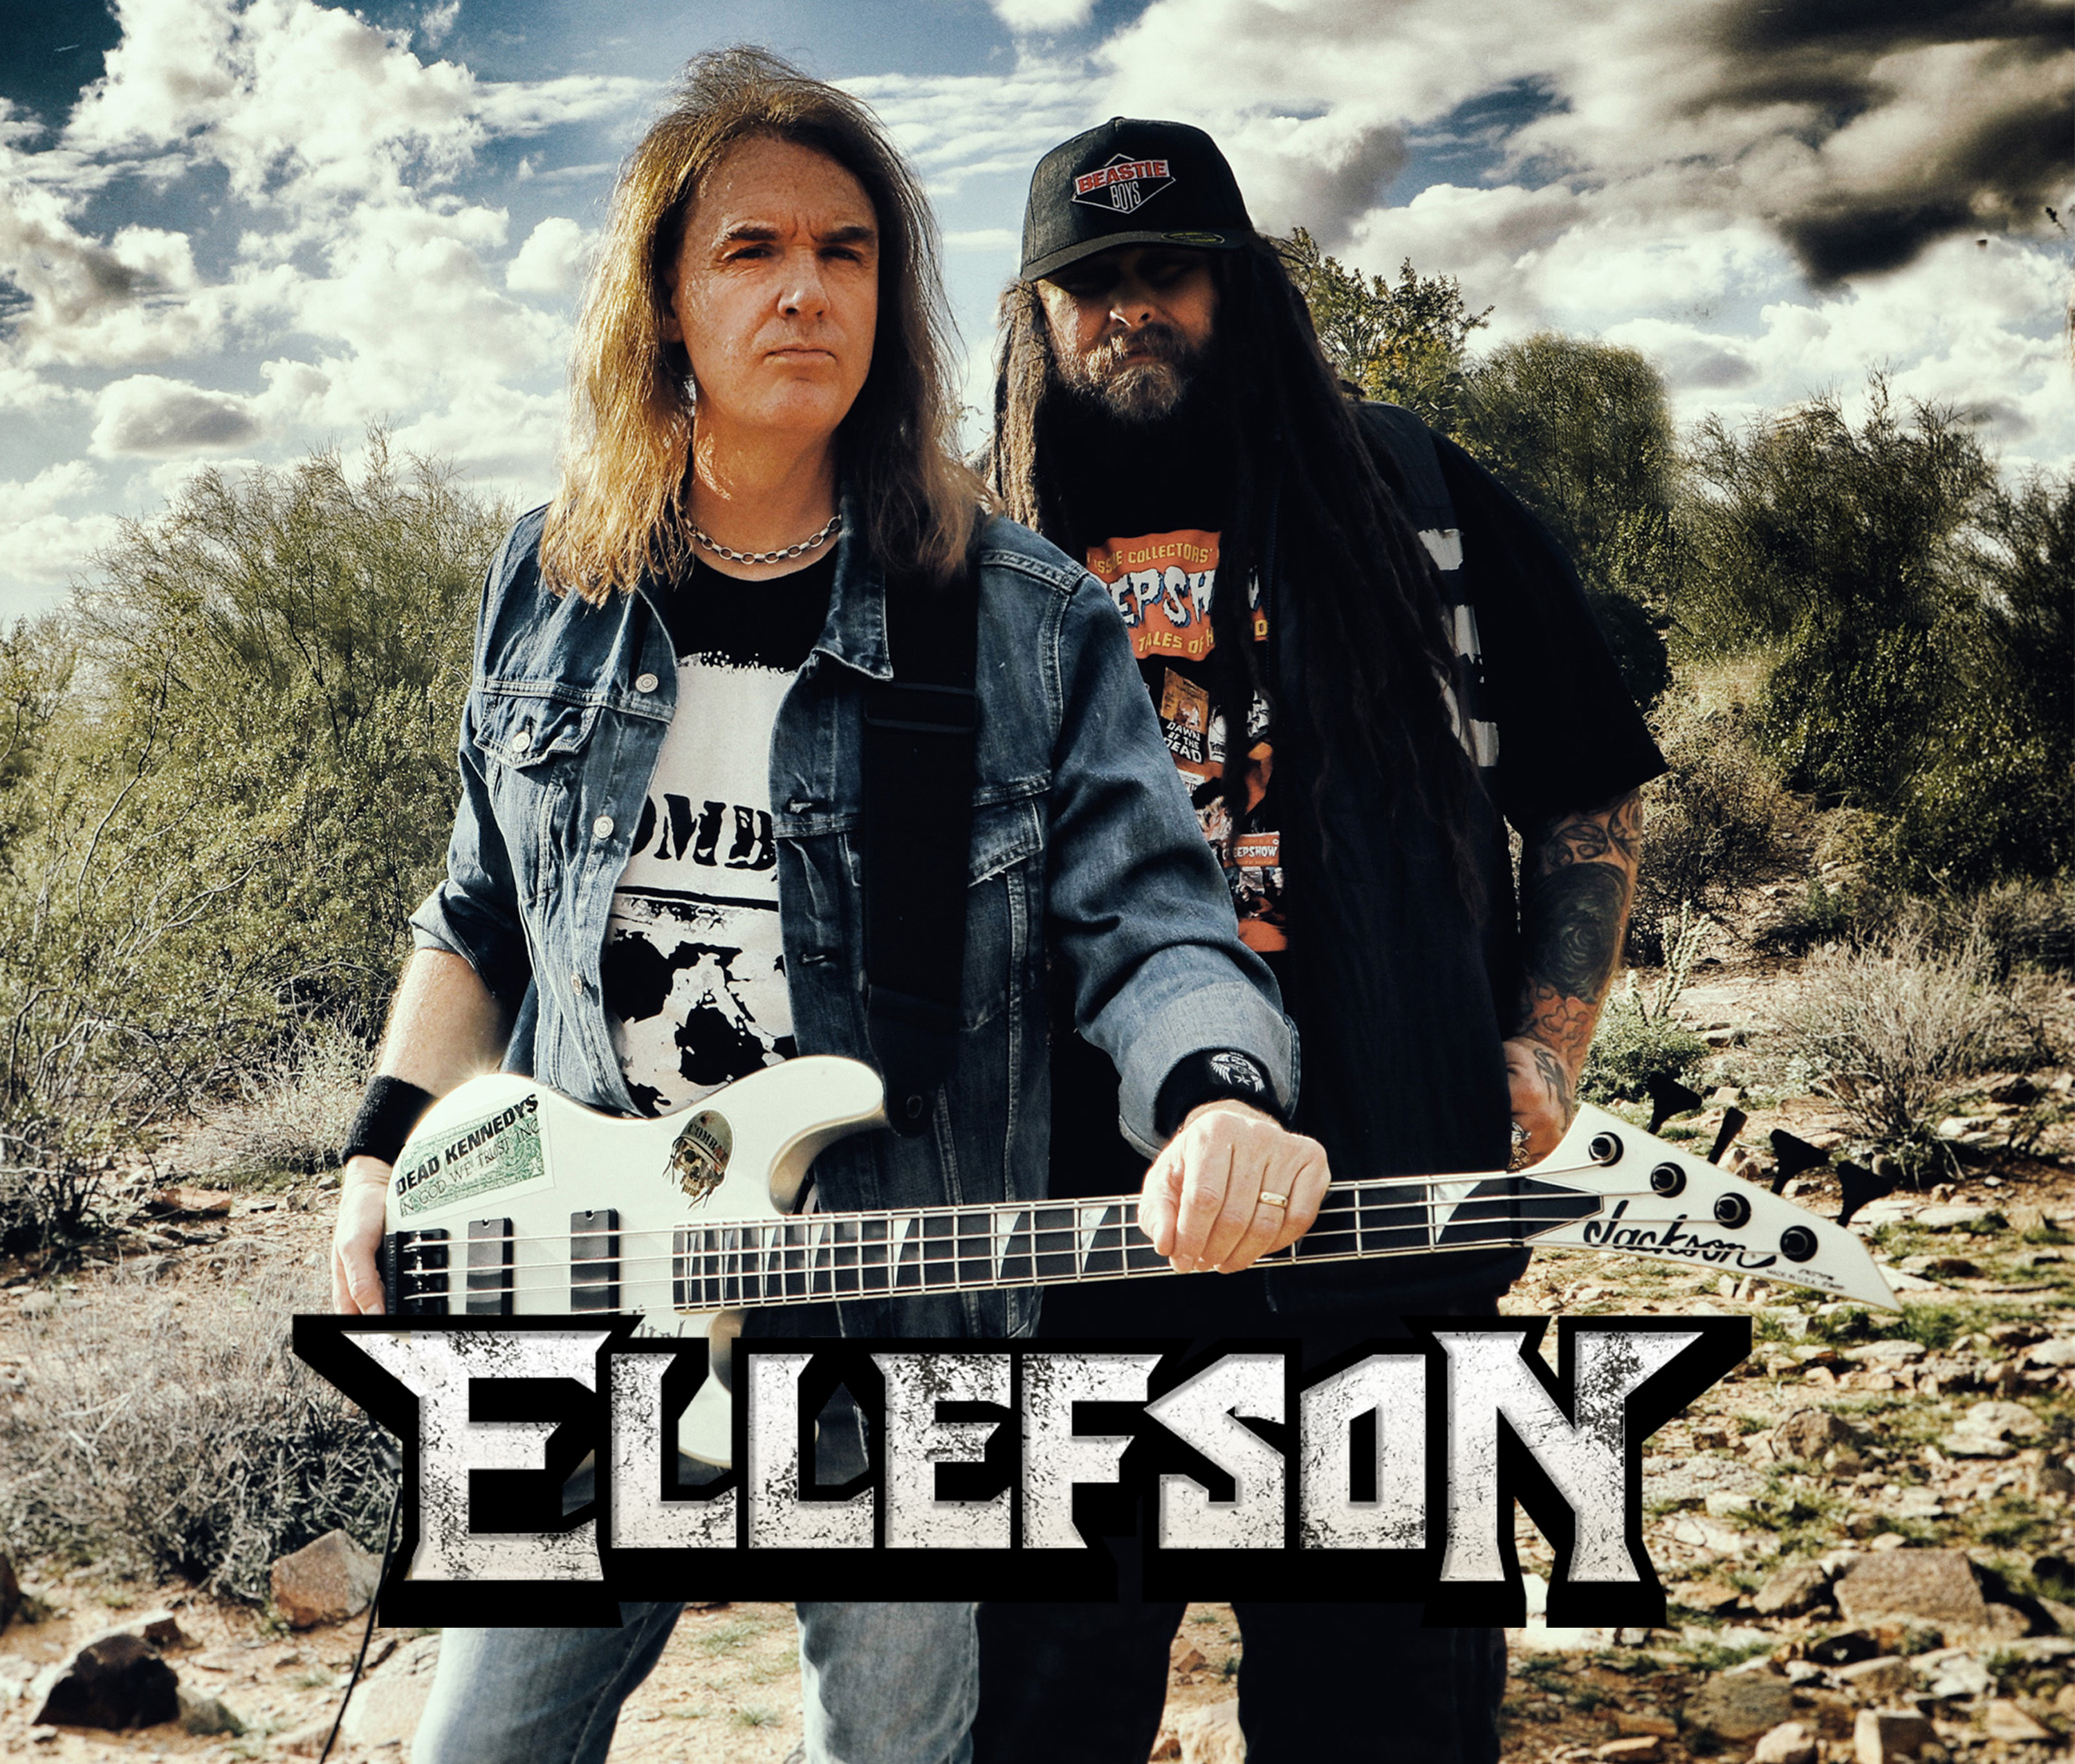 ELLEFSON TO RELEASE RE-IMAGINED COVER OF POST MALONE TRACK